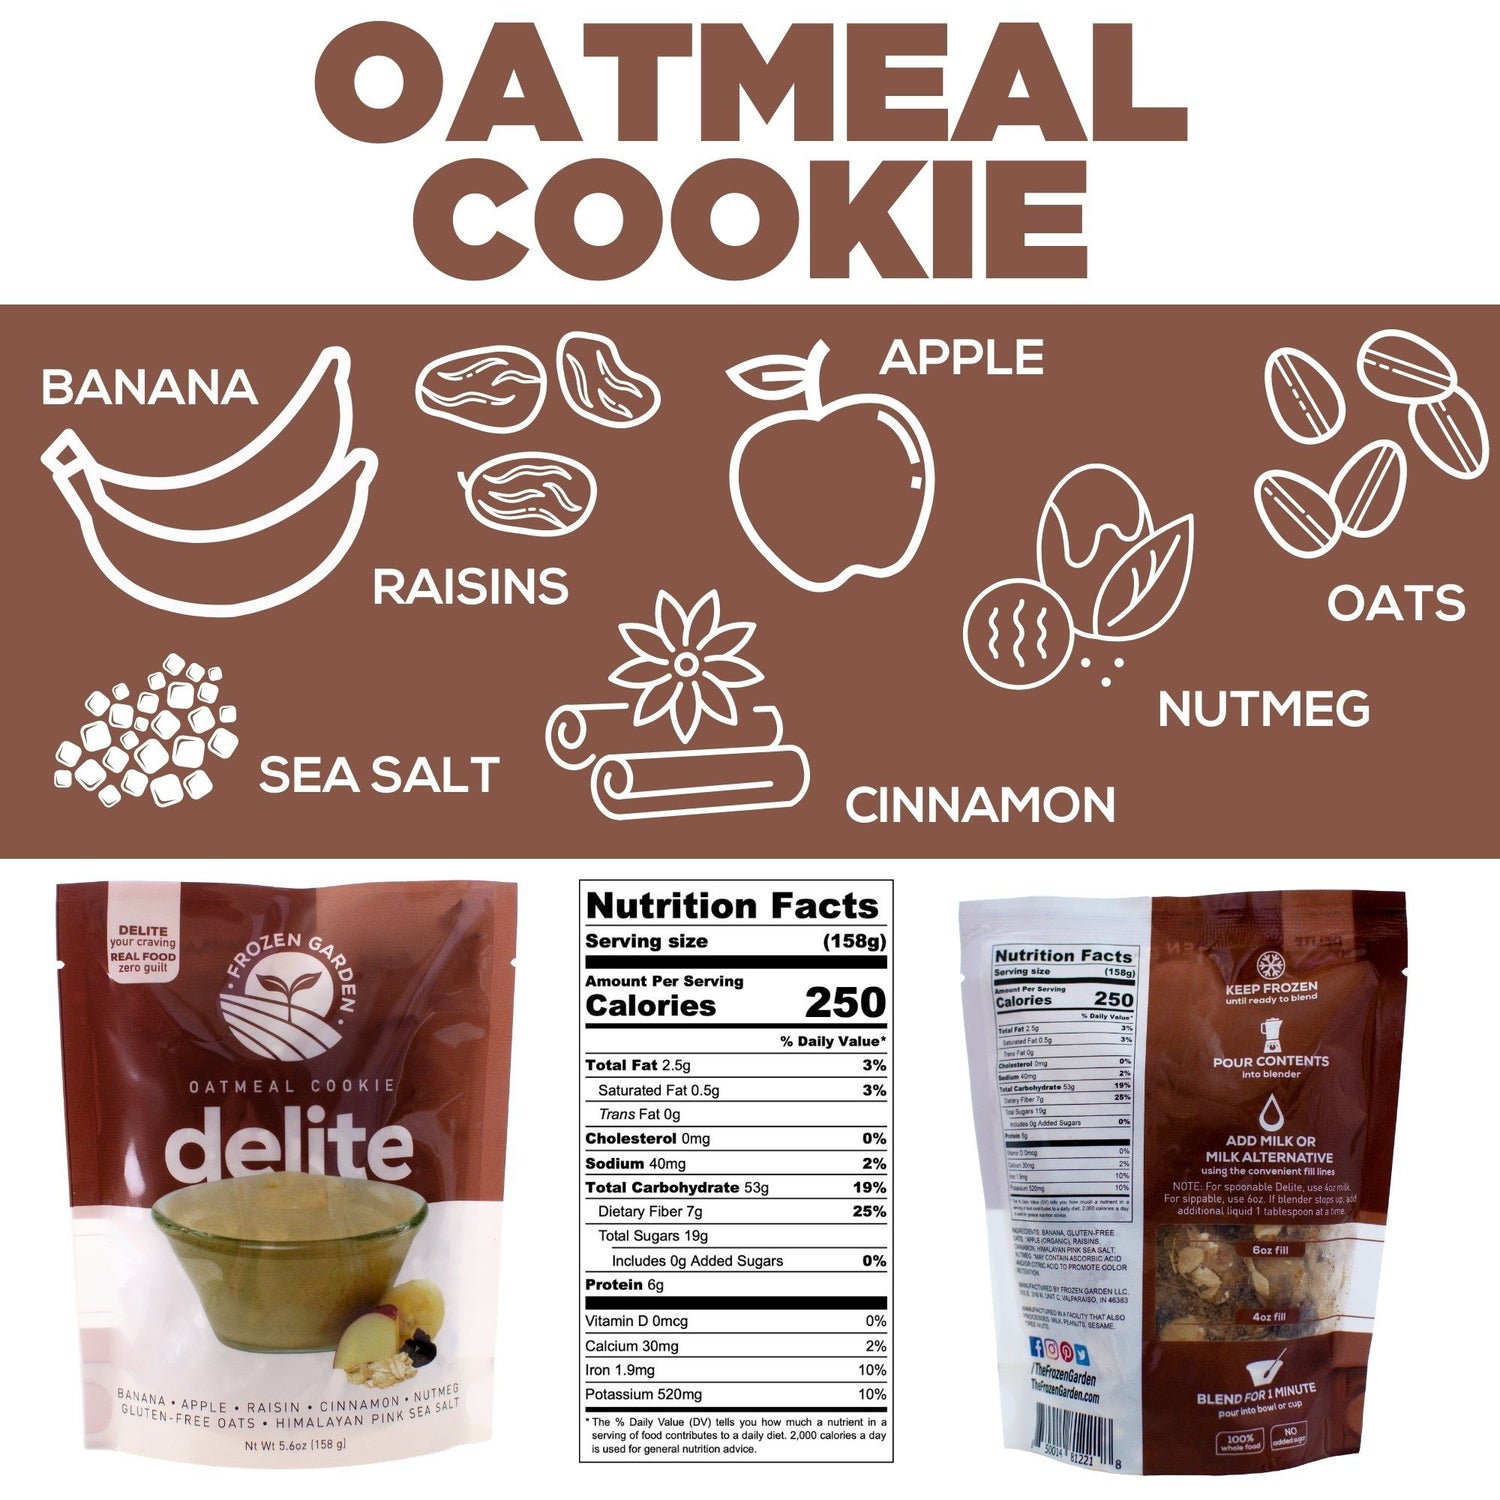 Oatmeal Cookie ingredients. doodle drawings of banana, raisins, sea salt, apple, cinnamon, nutmeg, oats. With nutrition facts. 250 calories, 2.5 saturated fat, 0.5 grams saturated fat, 0 grams trans fat, 0 milligrams cholesterol, 40 milligrams sodium, 53 grams total carbohydrates, 7 grams dietary fiber, 19 grams sugars, includes 0 grams added sugars, 6 grams protein. 0 micrograms vitamin d, 30 milligrams calcium, 1.9 milligrams iron, 520 milligrams potassium.  